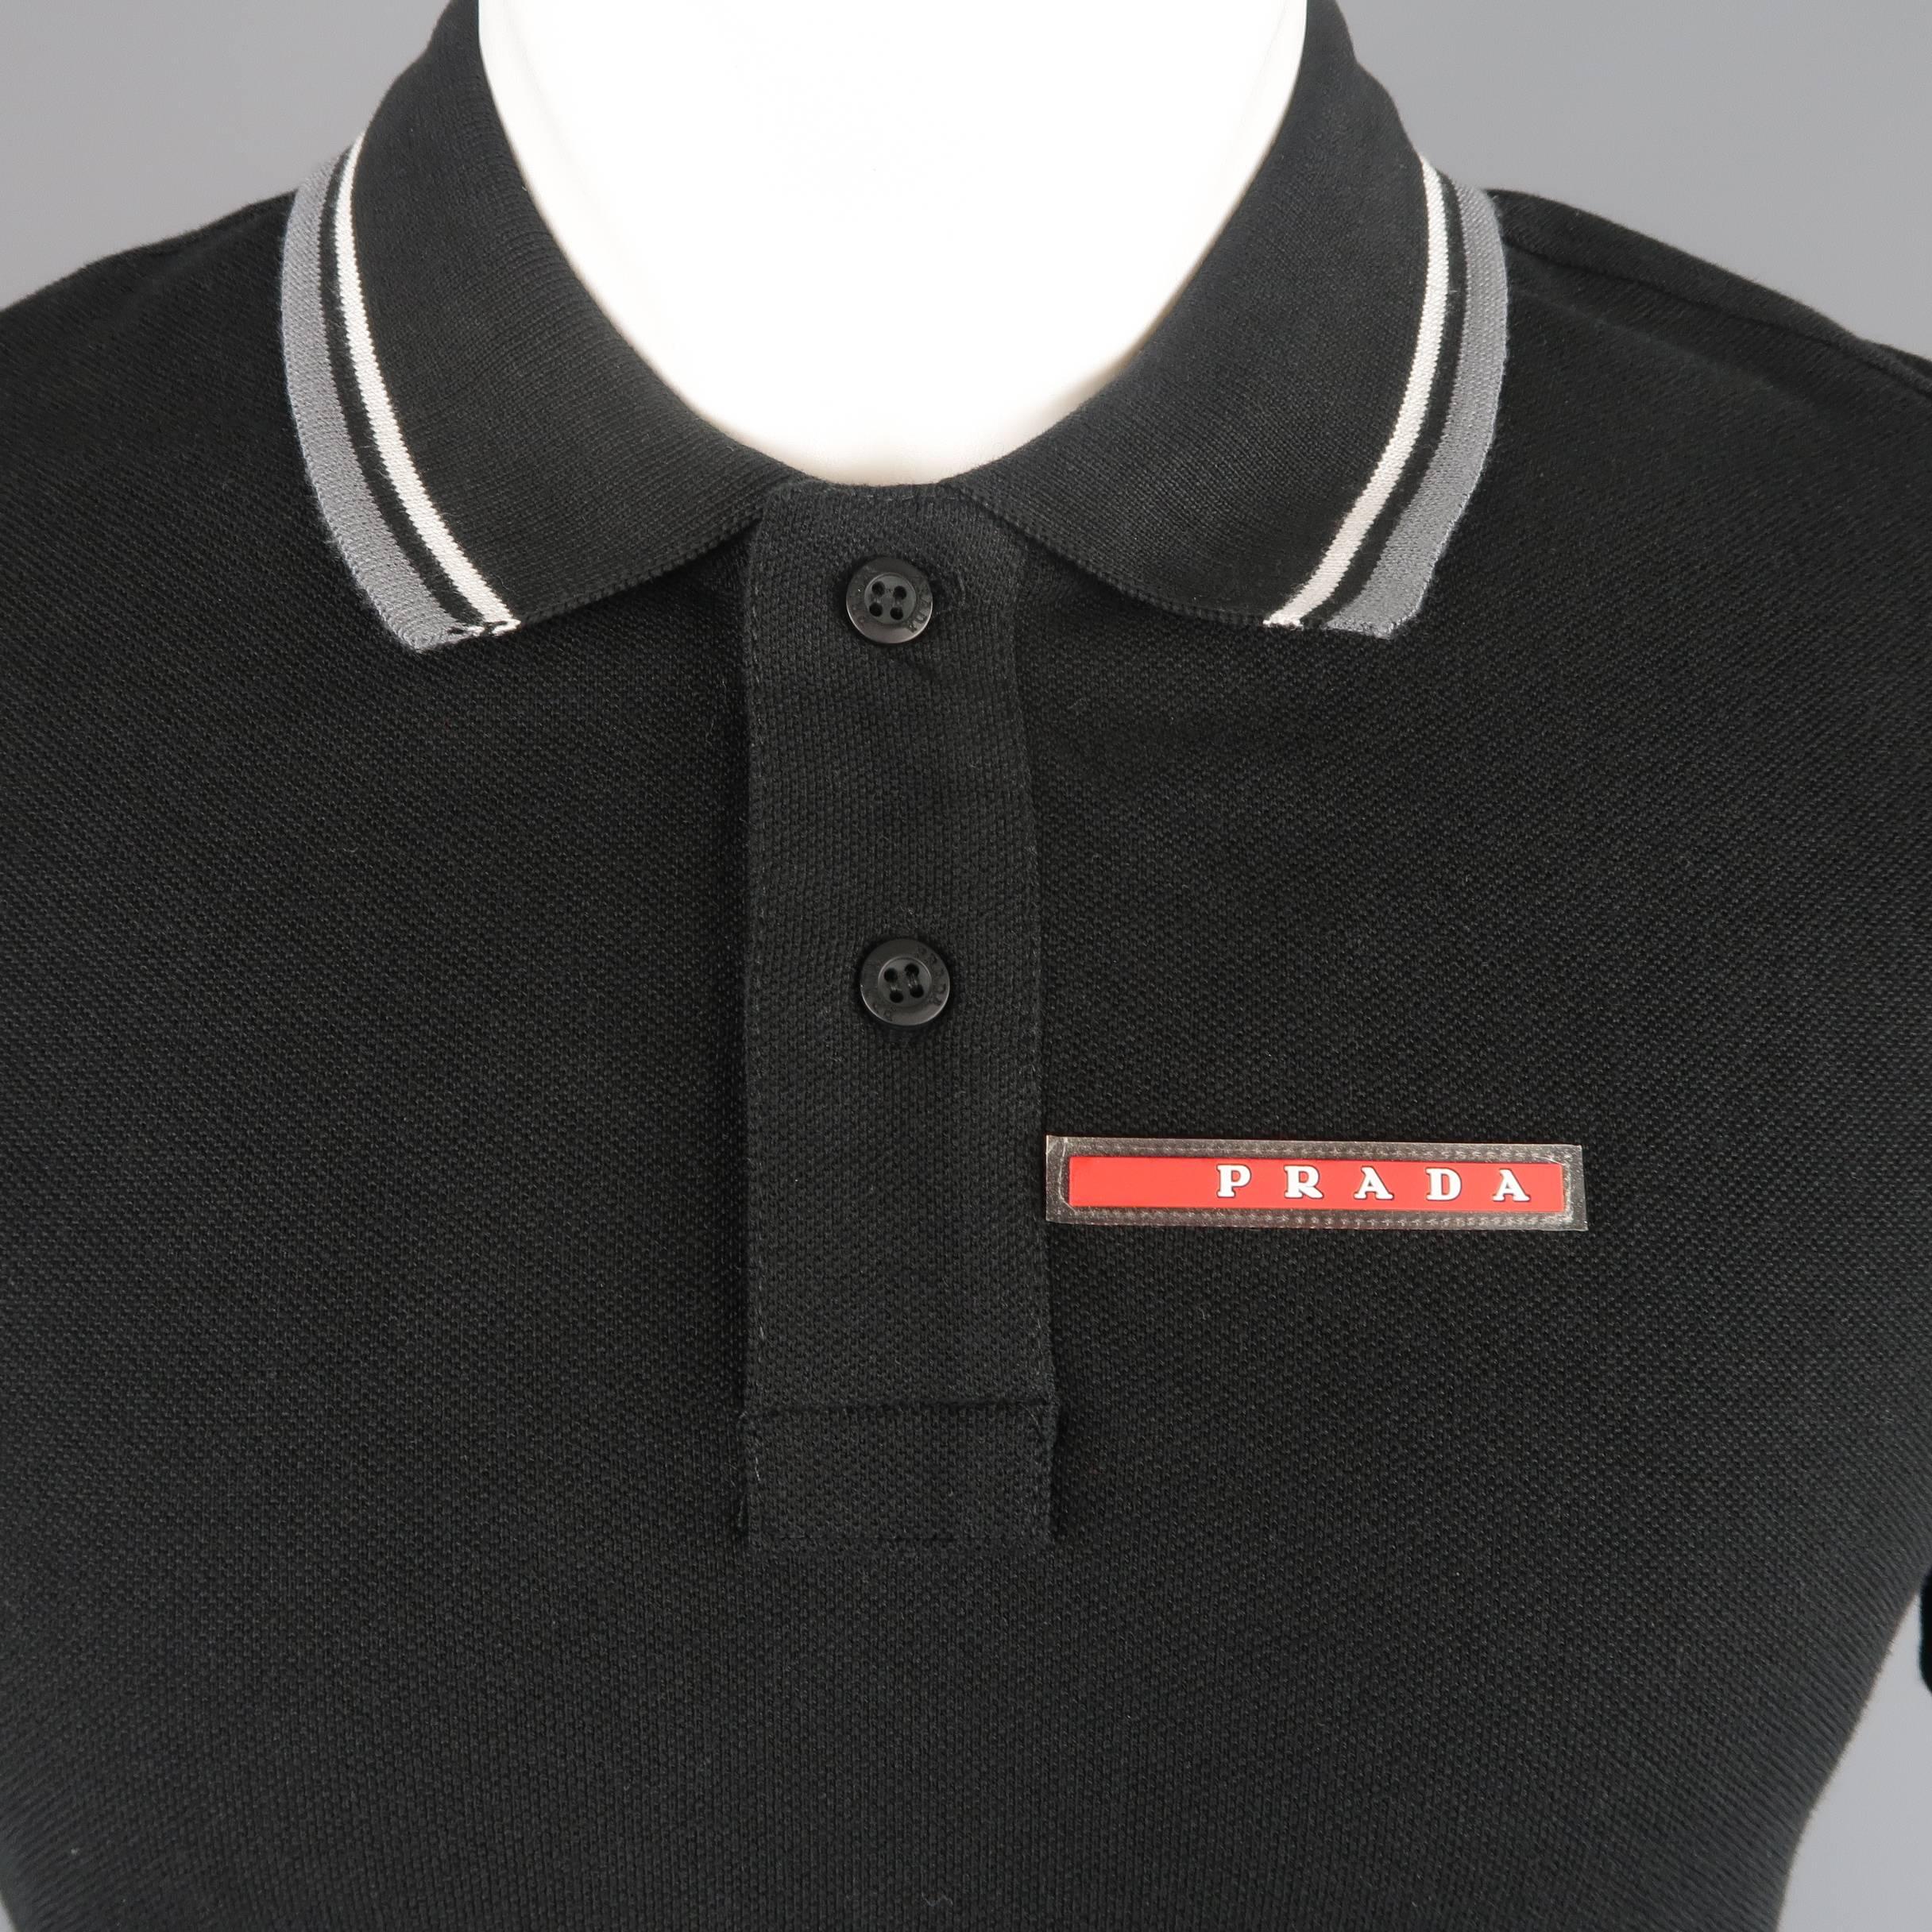 Classic PRADA polo comes in black cotton pique with gray striped trim and red rubber logo tab.
 
New with Tags.
Marked: M
 
Measurements:
 
Shoulder: 17 in.
Chest: 38 in.
Sleeve: 8 in.
Length: 28 in.